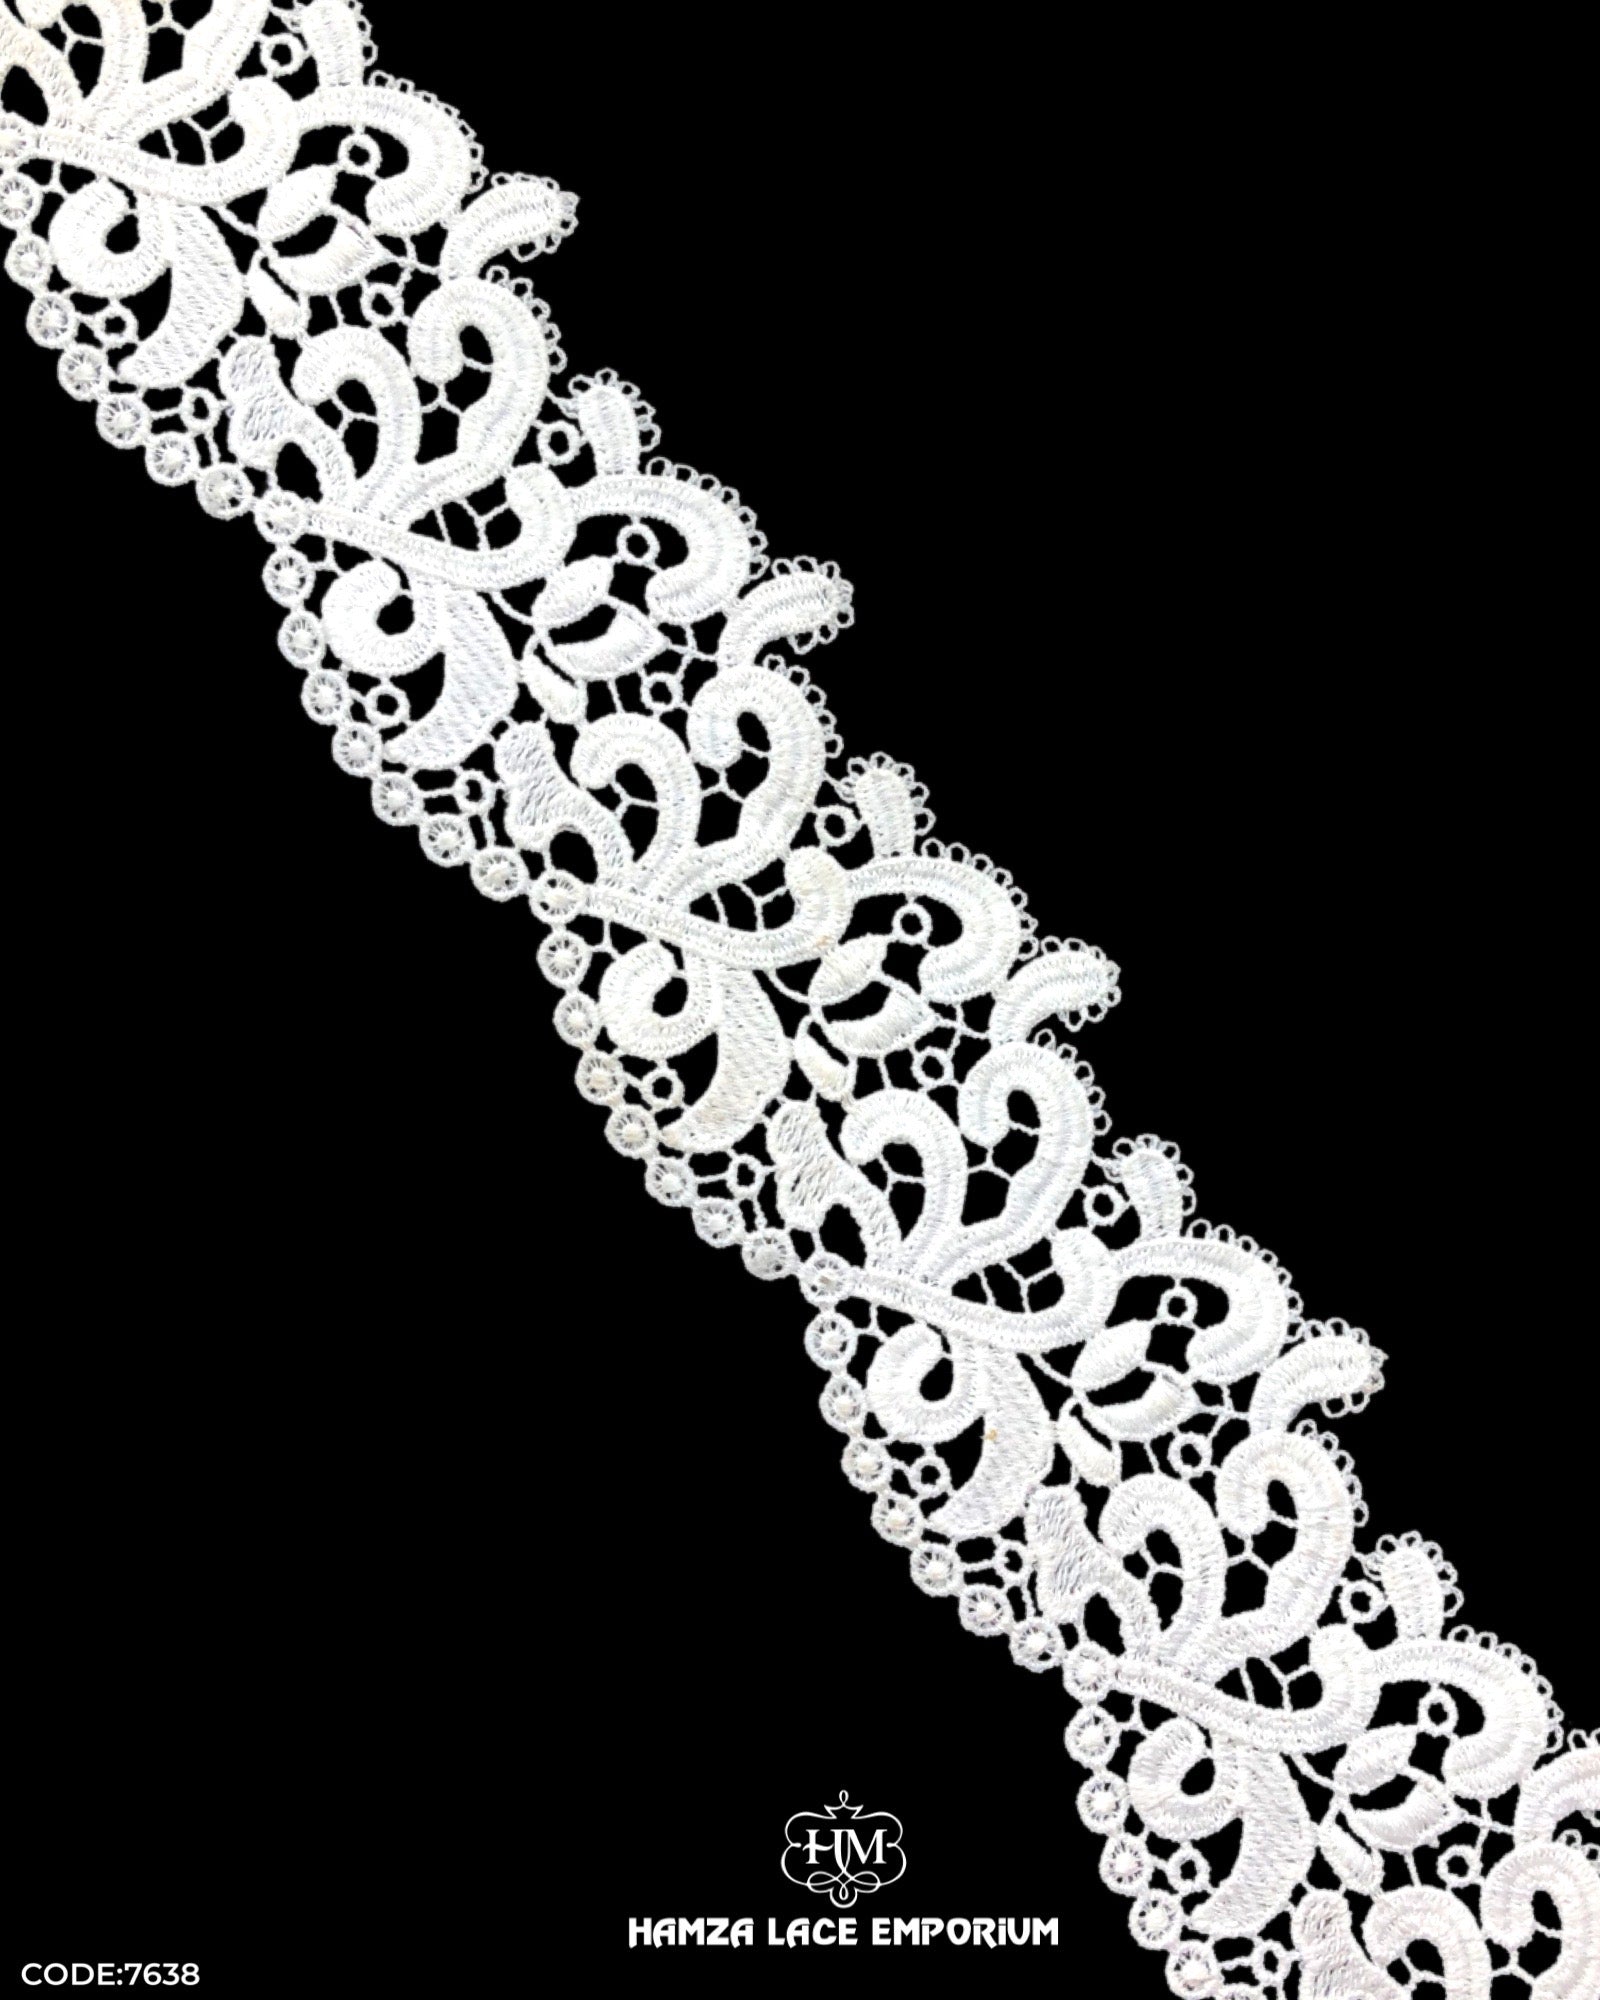 'Flower Design Lace 7638' with 'Hamza Lace' Sign at the bottom